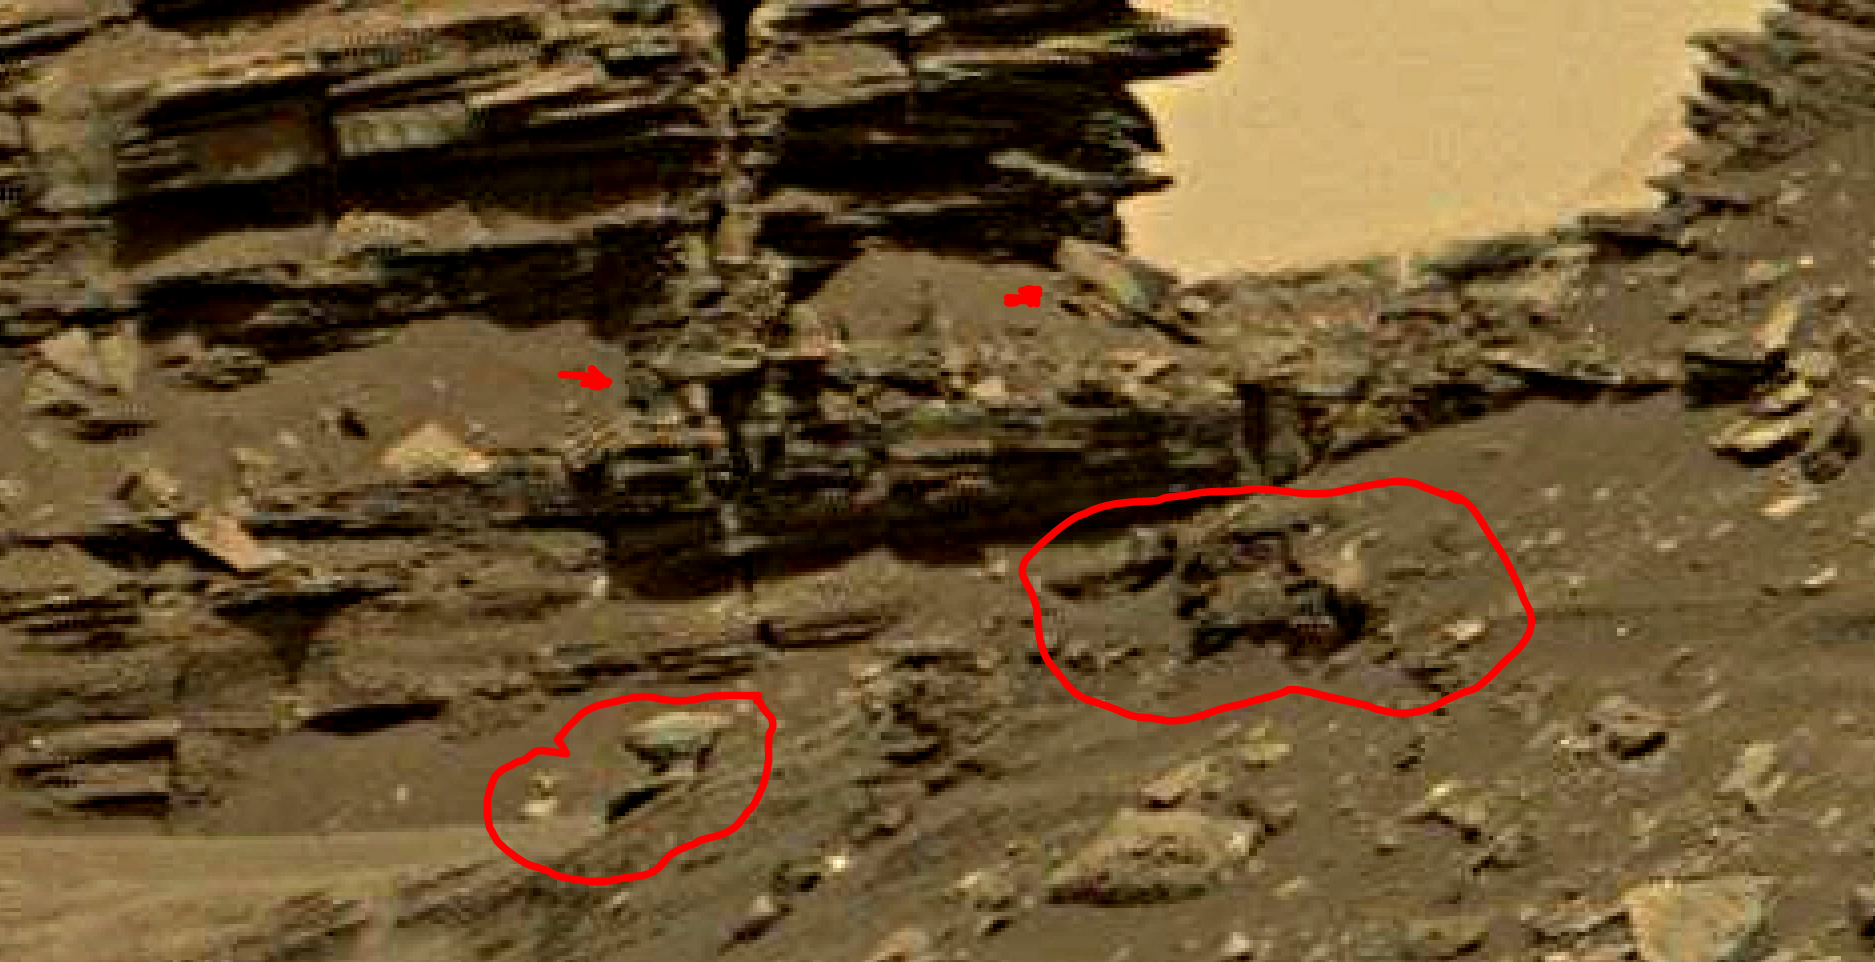 mars-sol-1454-anomaly-artifacts-22-was-life-on-mars